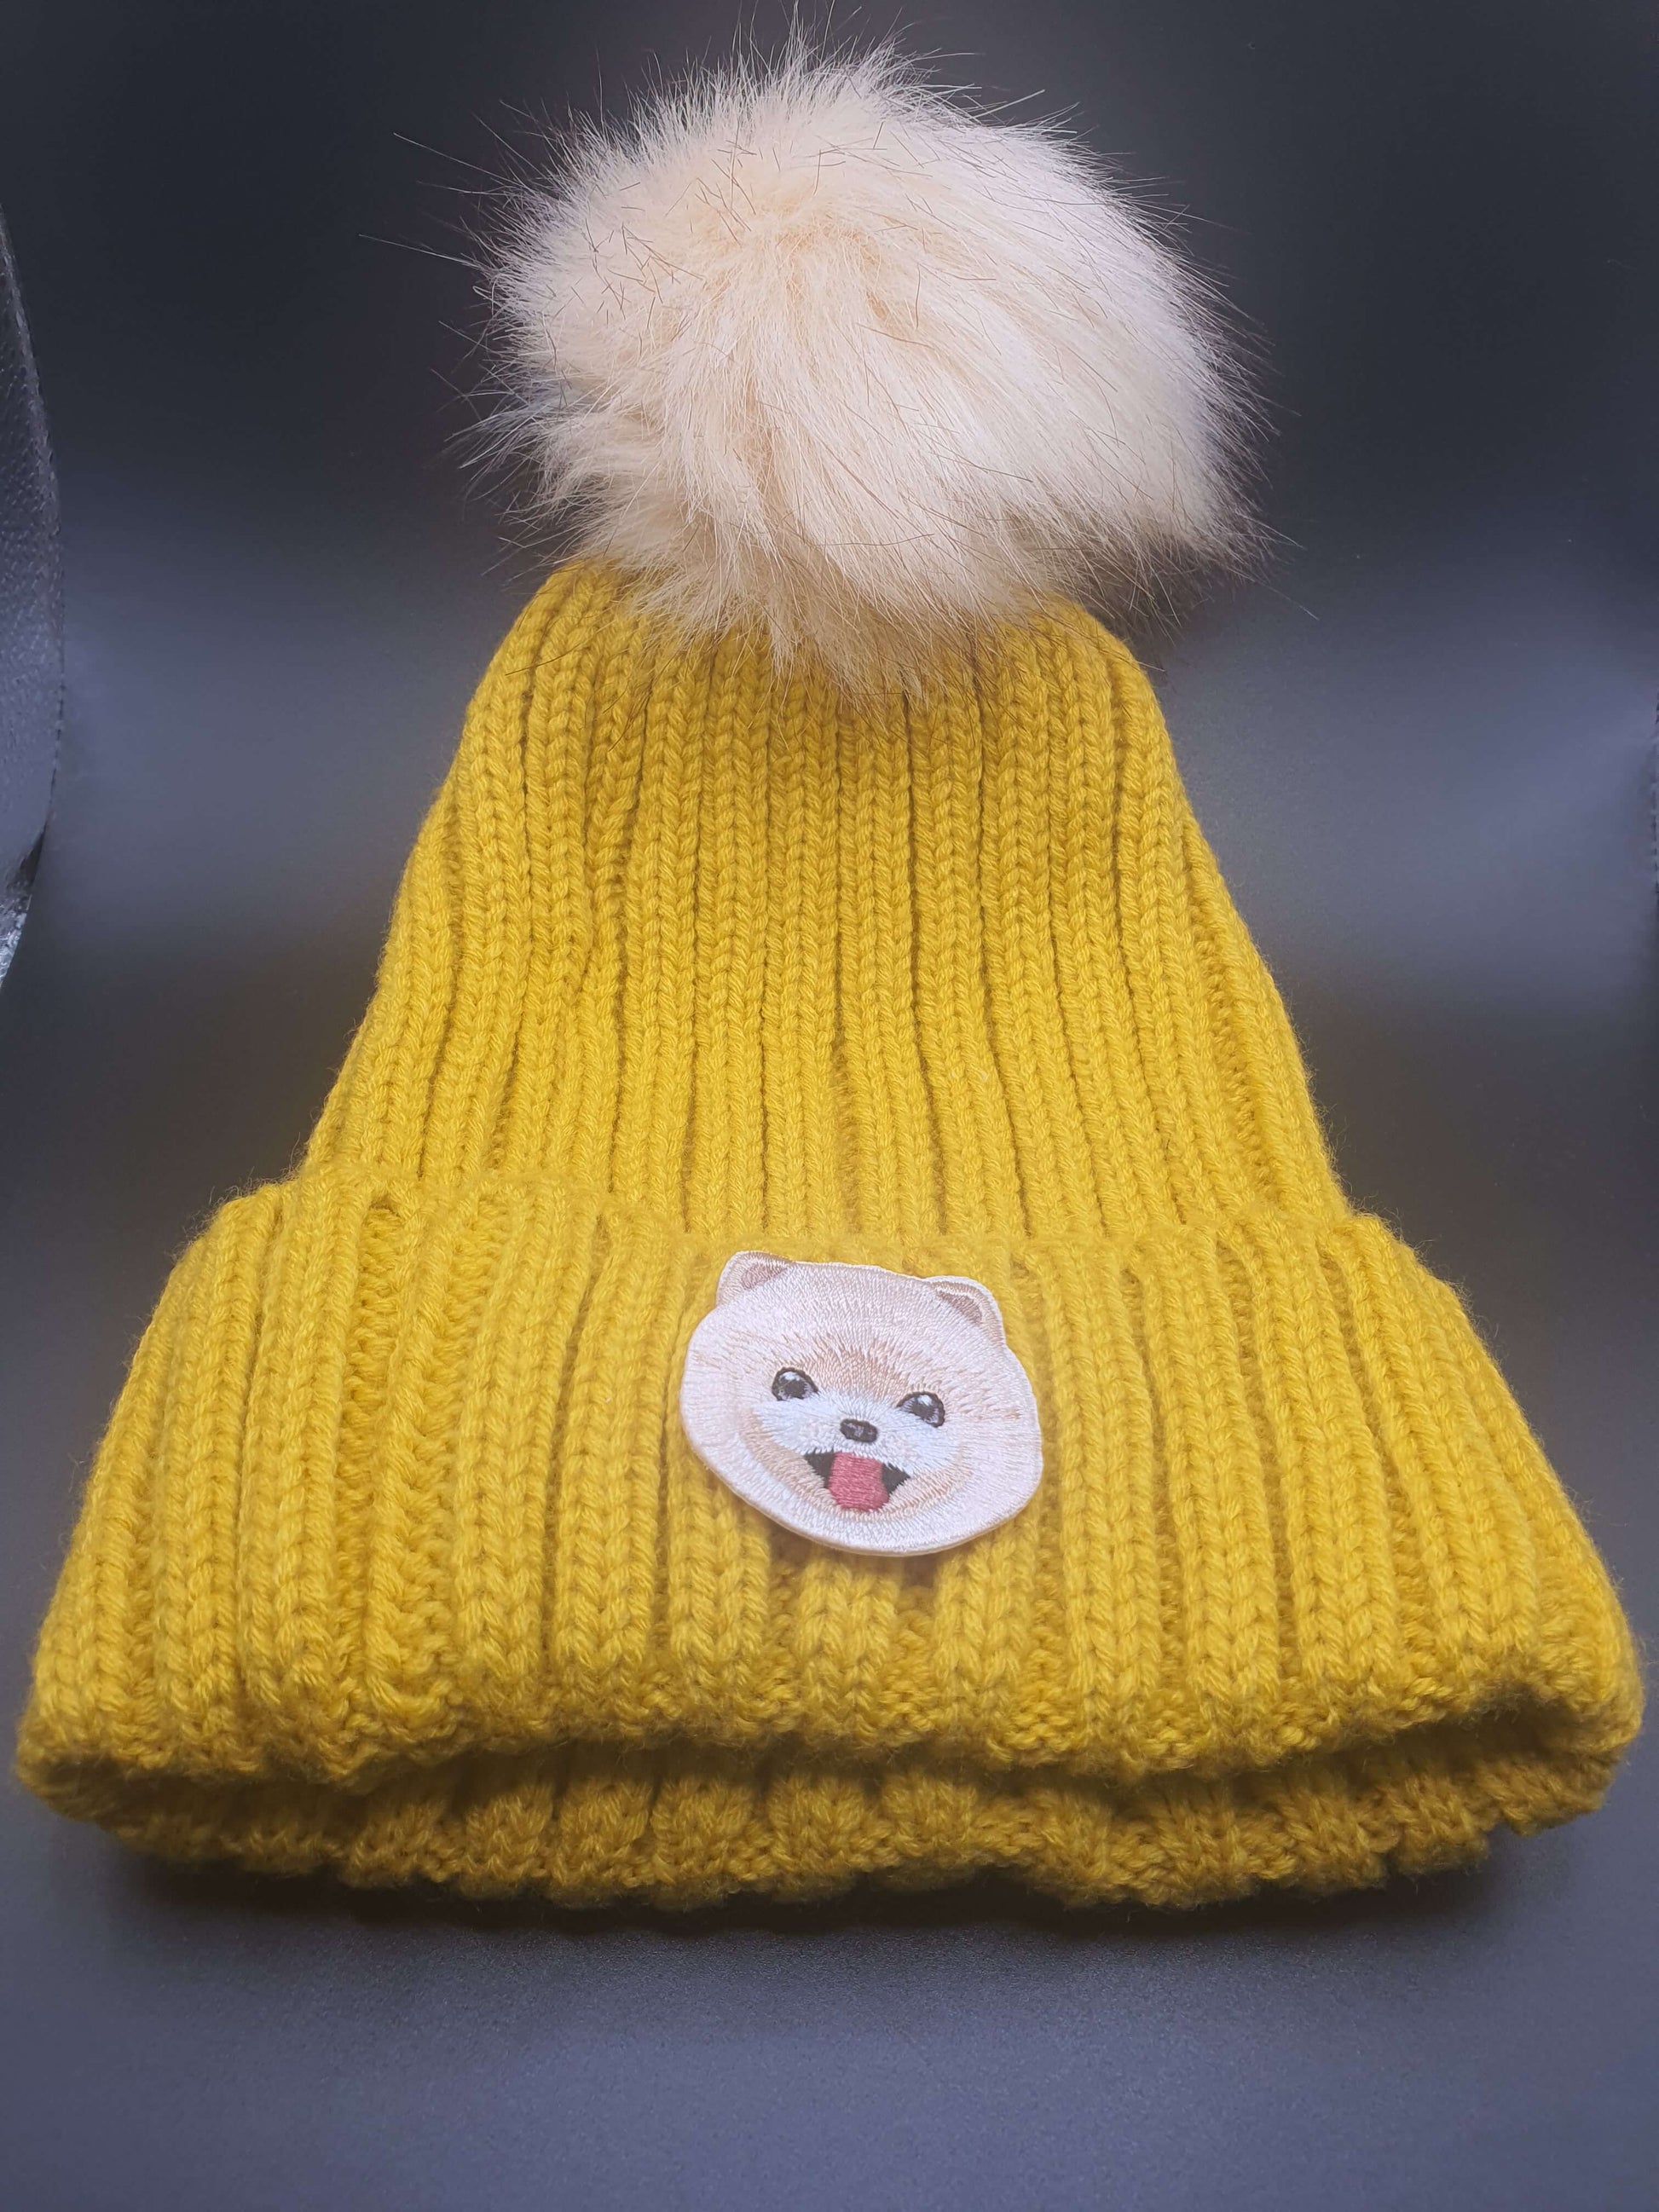 Dog Themed Knitted Beanies - Style's Bug Pomeranian / Yellow